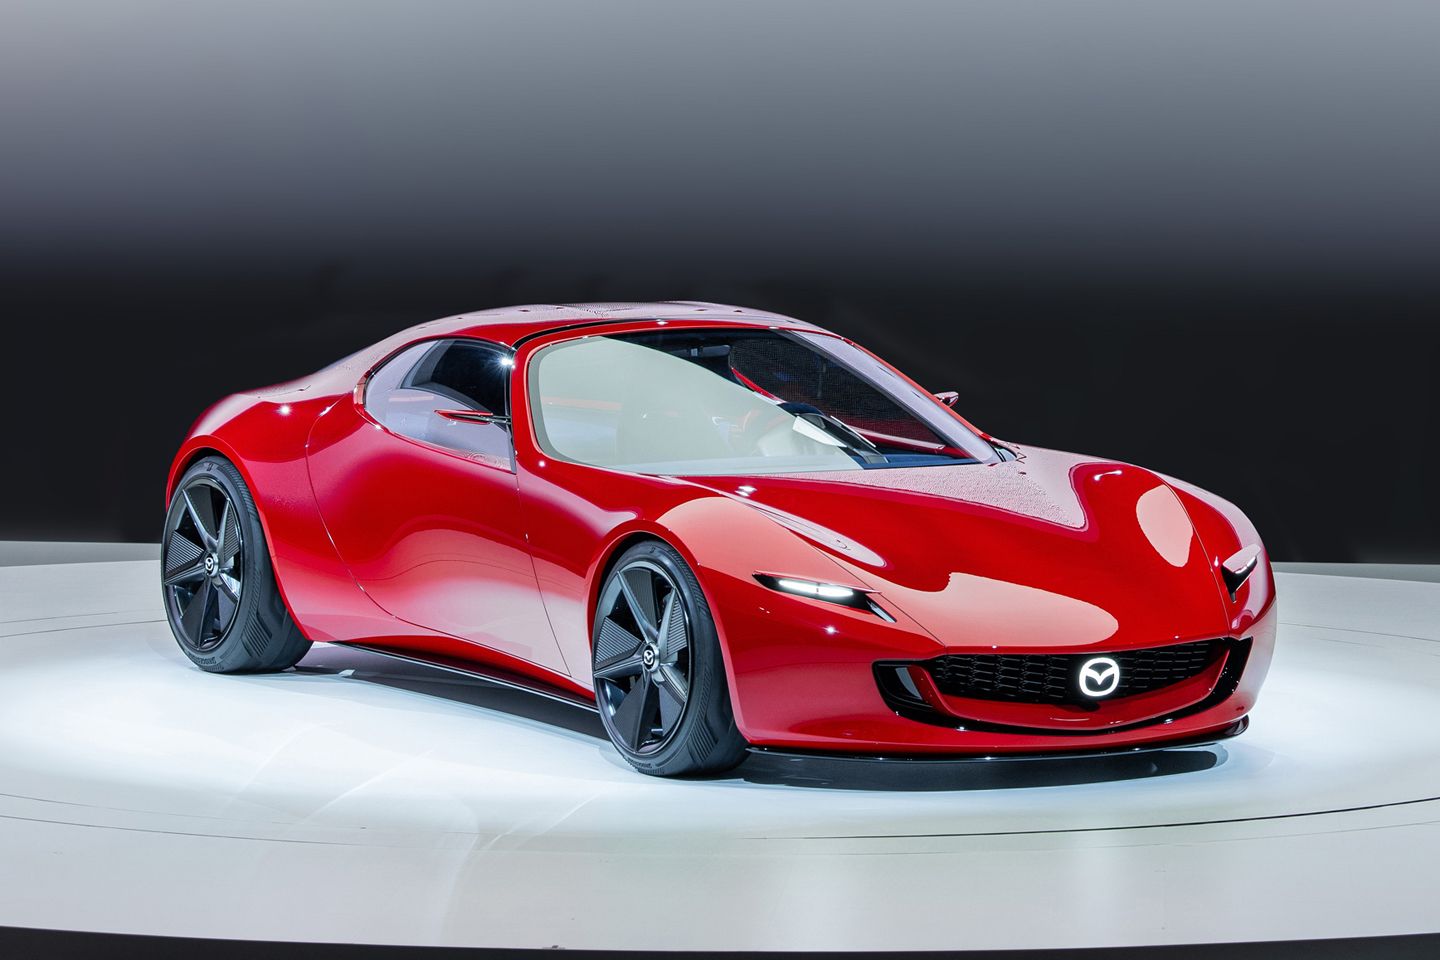 Mazda bucks EV trend with Iconic SP concept sports car, but will they build  it? - The Globe and Mail